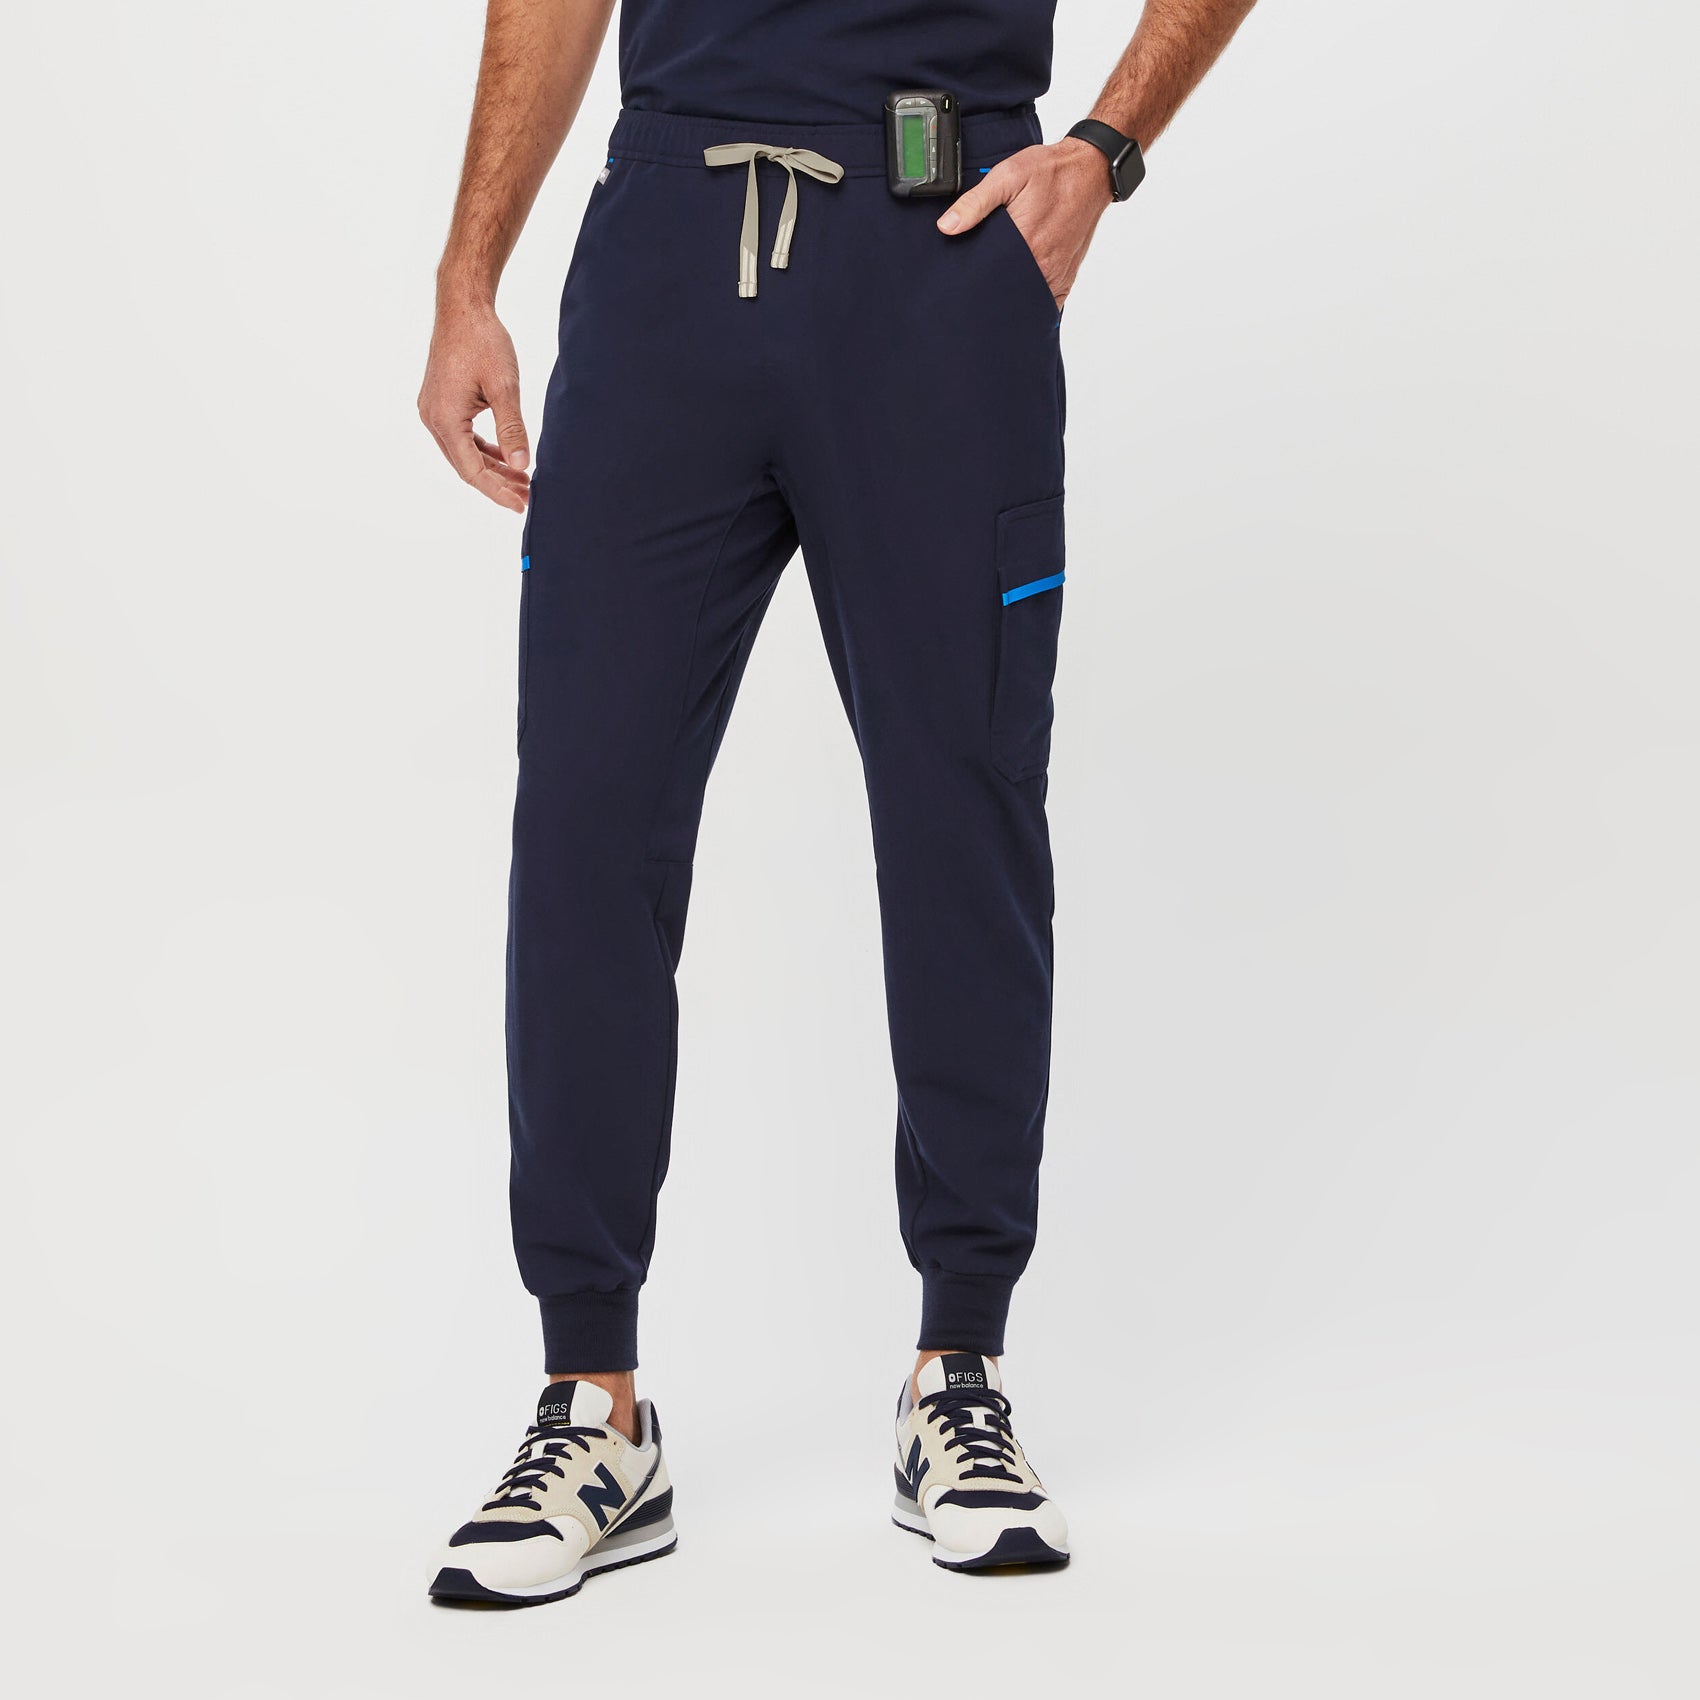 FIGS JOGGER SCRUB PANTS REVIEW  comparing FIGS to Cherokee Infinity joggers  